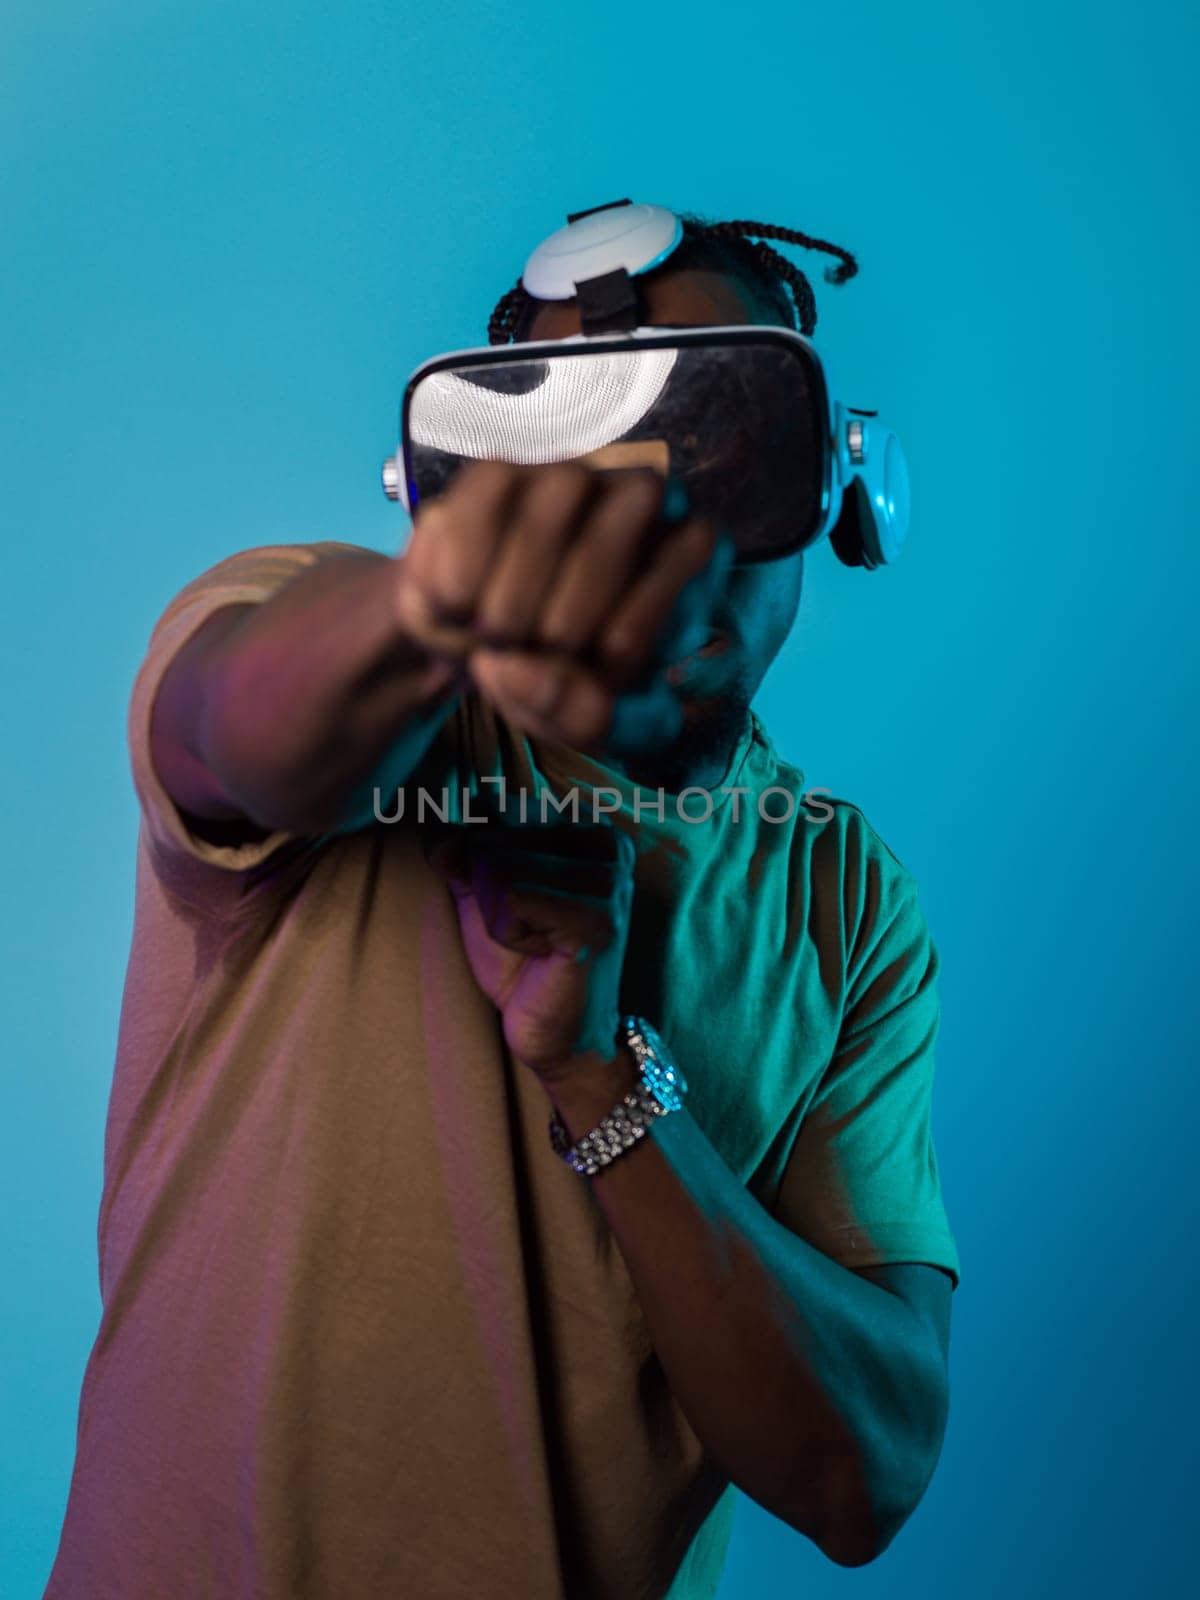 In an avant-garde scene, an African American man engages in cutting-edge virtual reality gaming, utilizing VR glasses to immerse himself in futuristic boxing games, set against a vivid blue background, showcasing the seamless fusion of technology, innovation, and interactive entertainment.